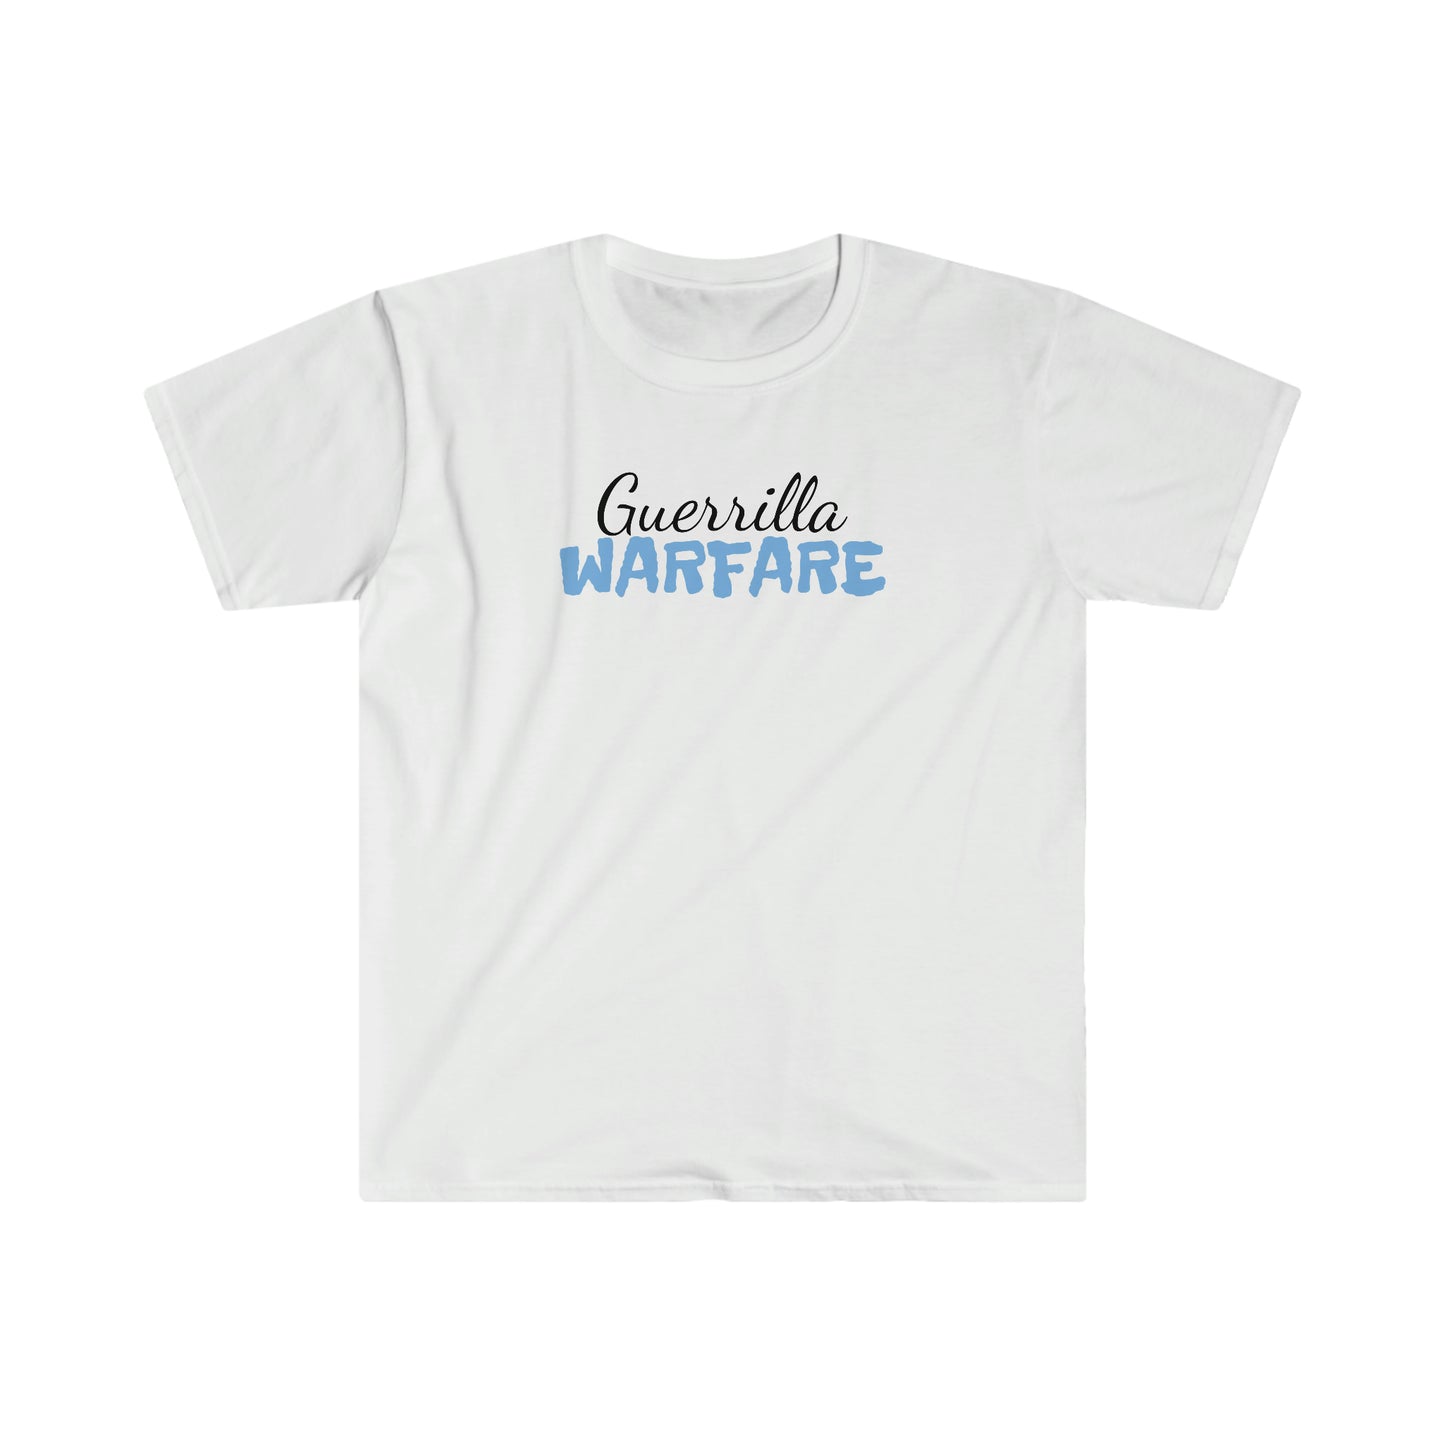 Copy of GWA COLLECTION OG Copy of GWA collection Unisex Softstyle T-Shirt